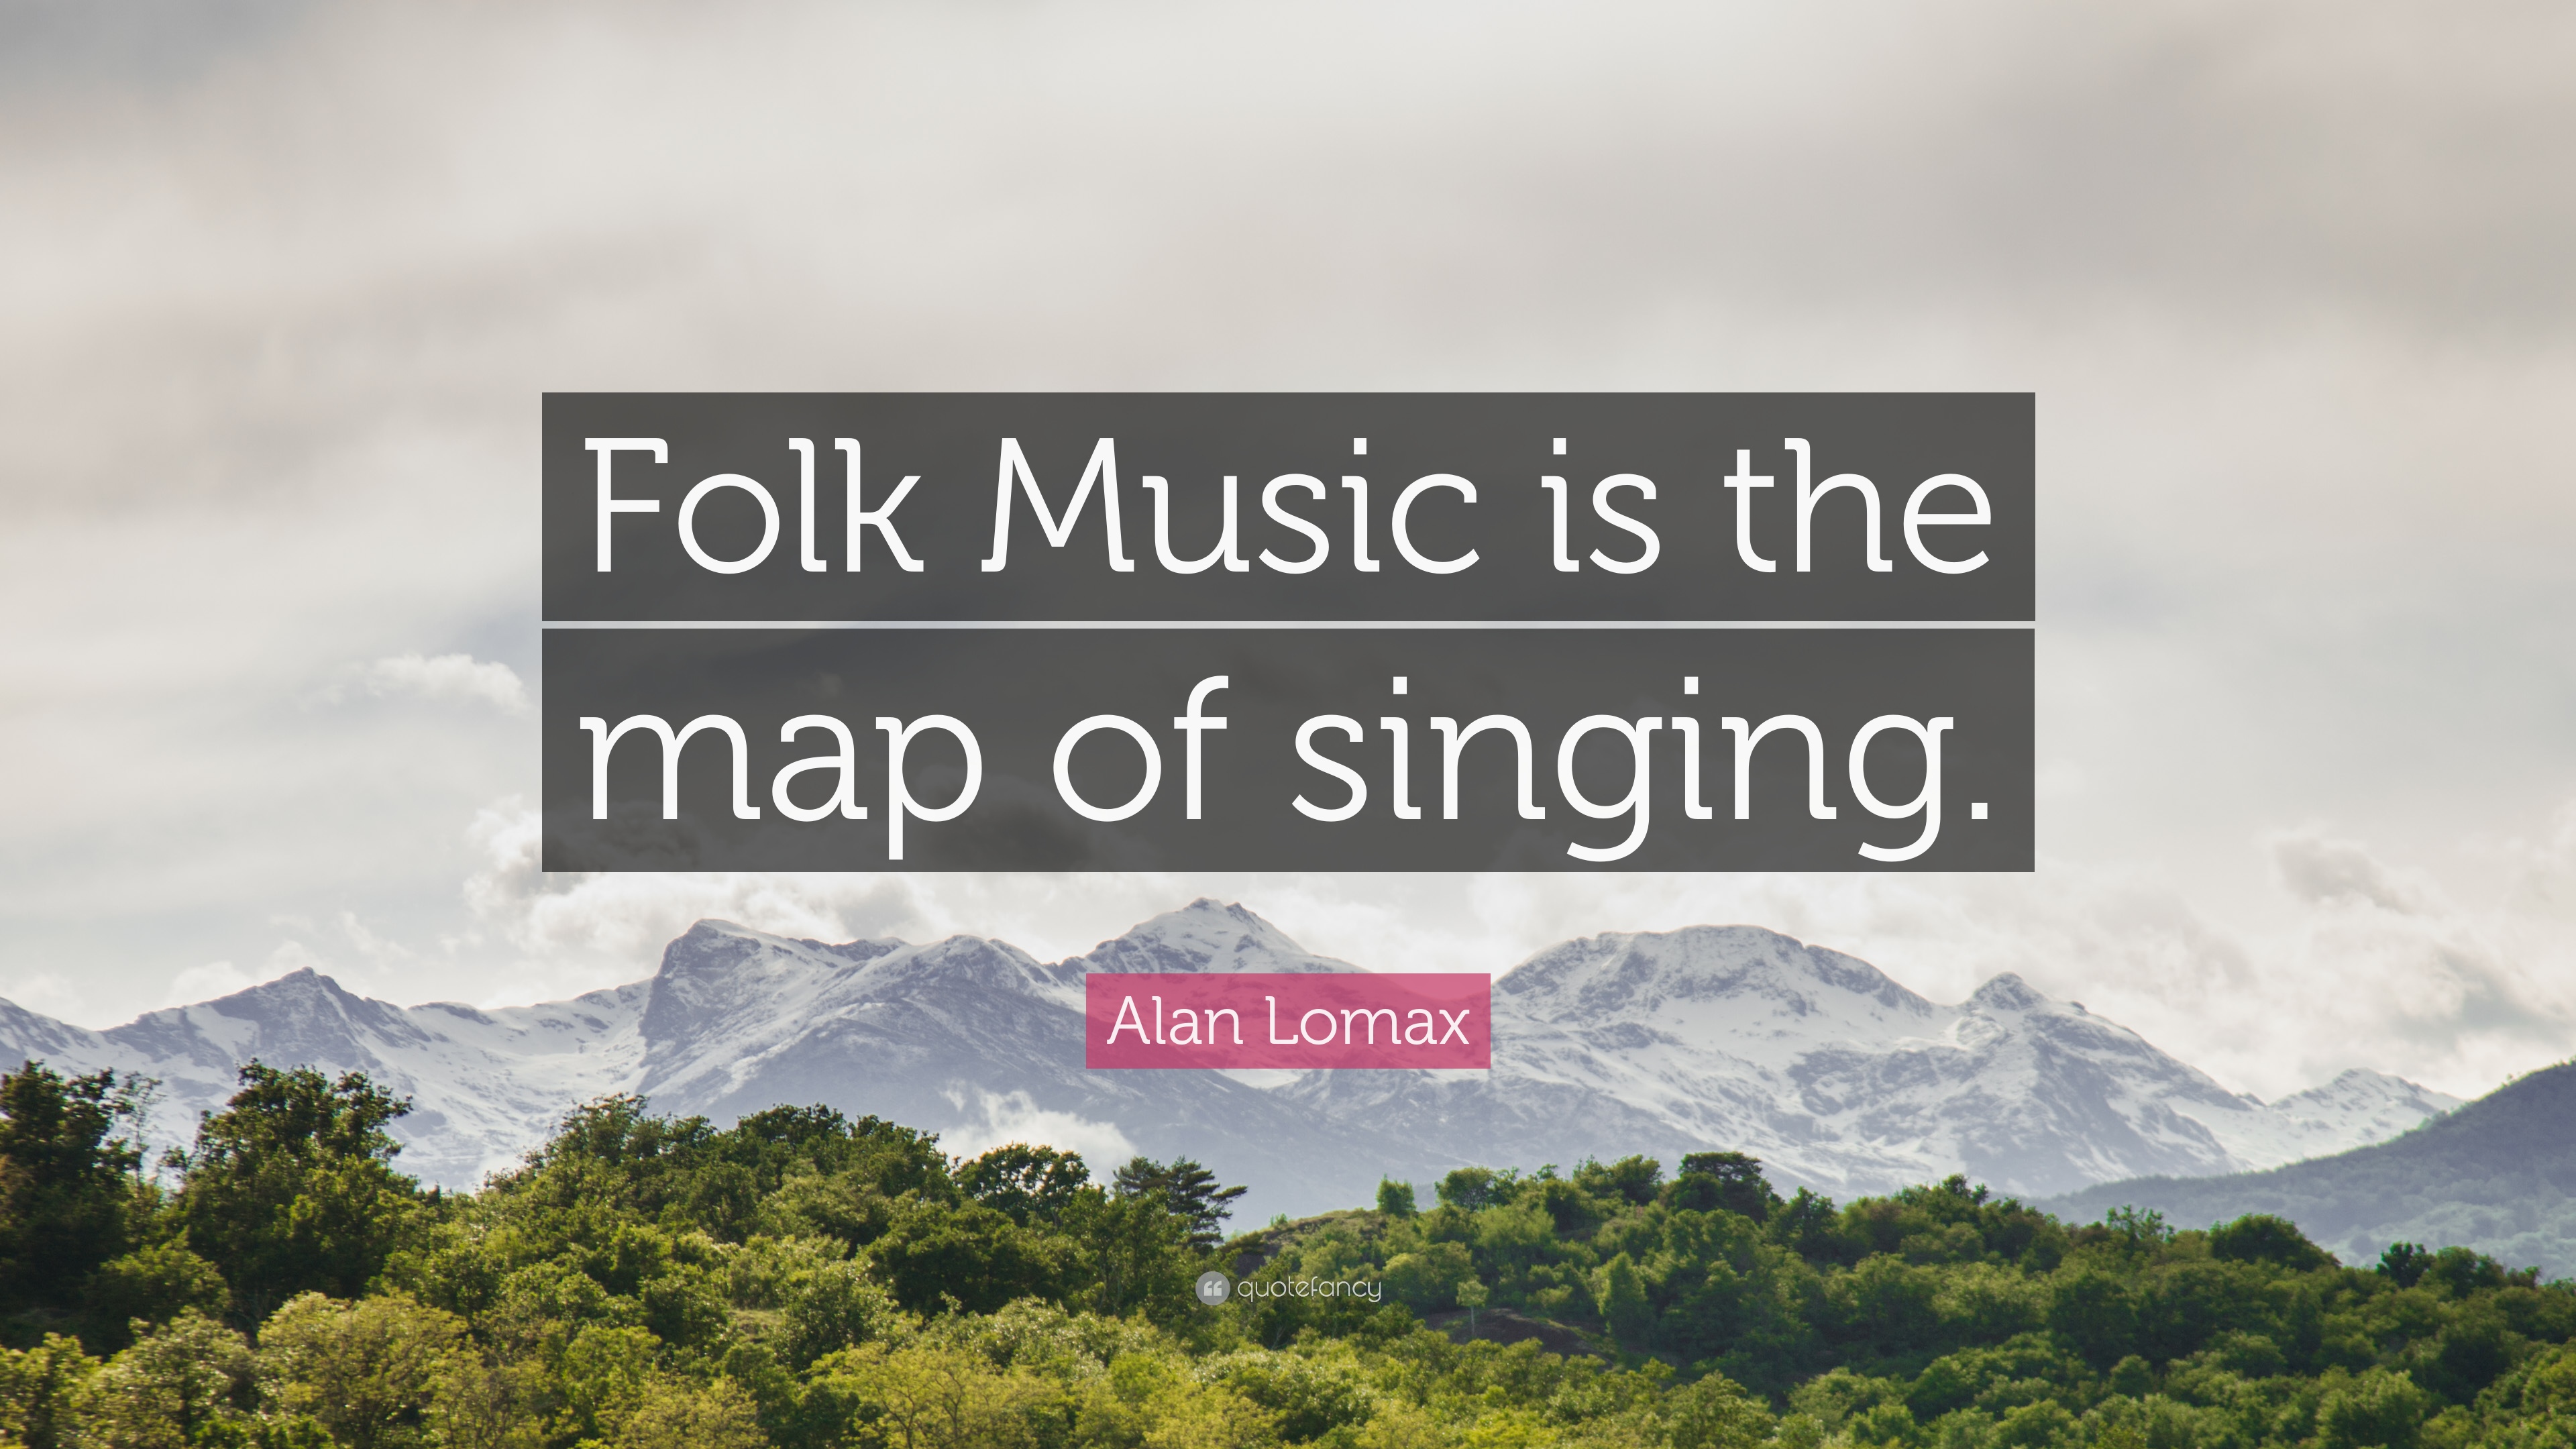 Alan Lomax Quote: “Folk Music is the map of singing.” 7 wallpaper